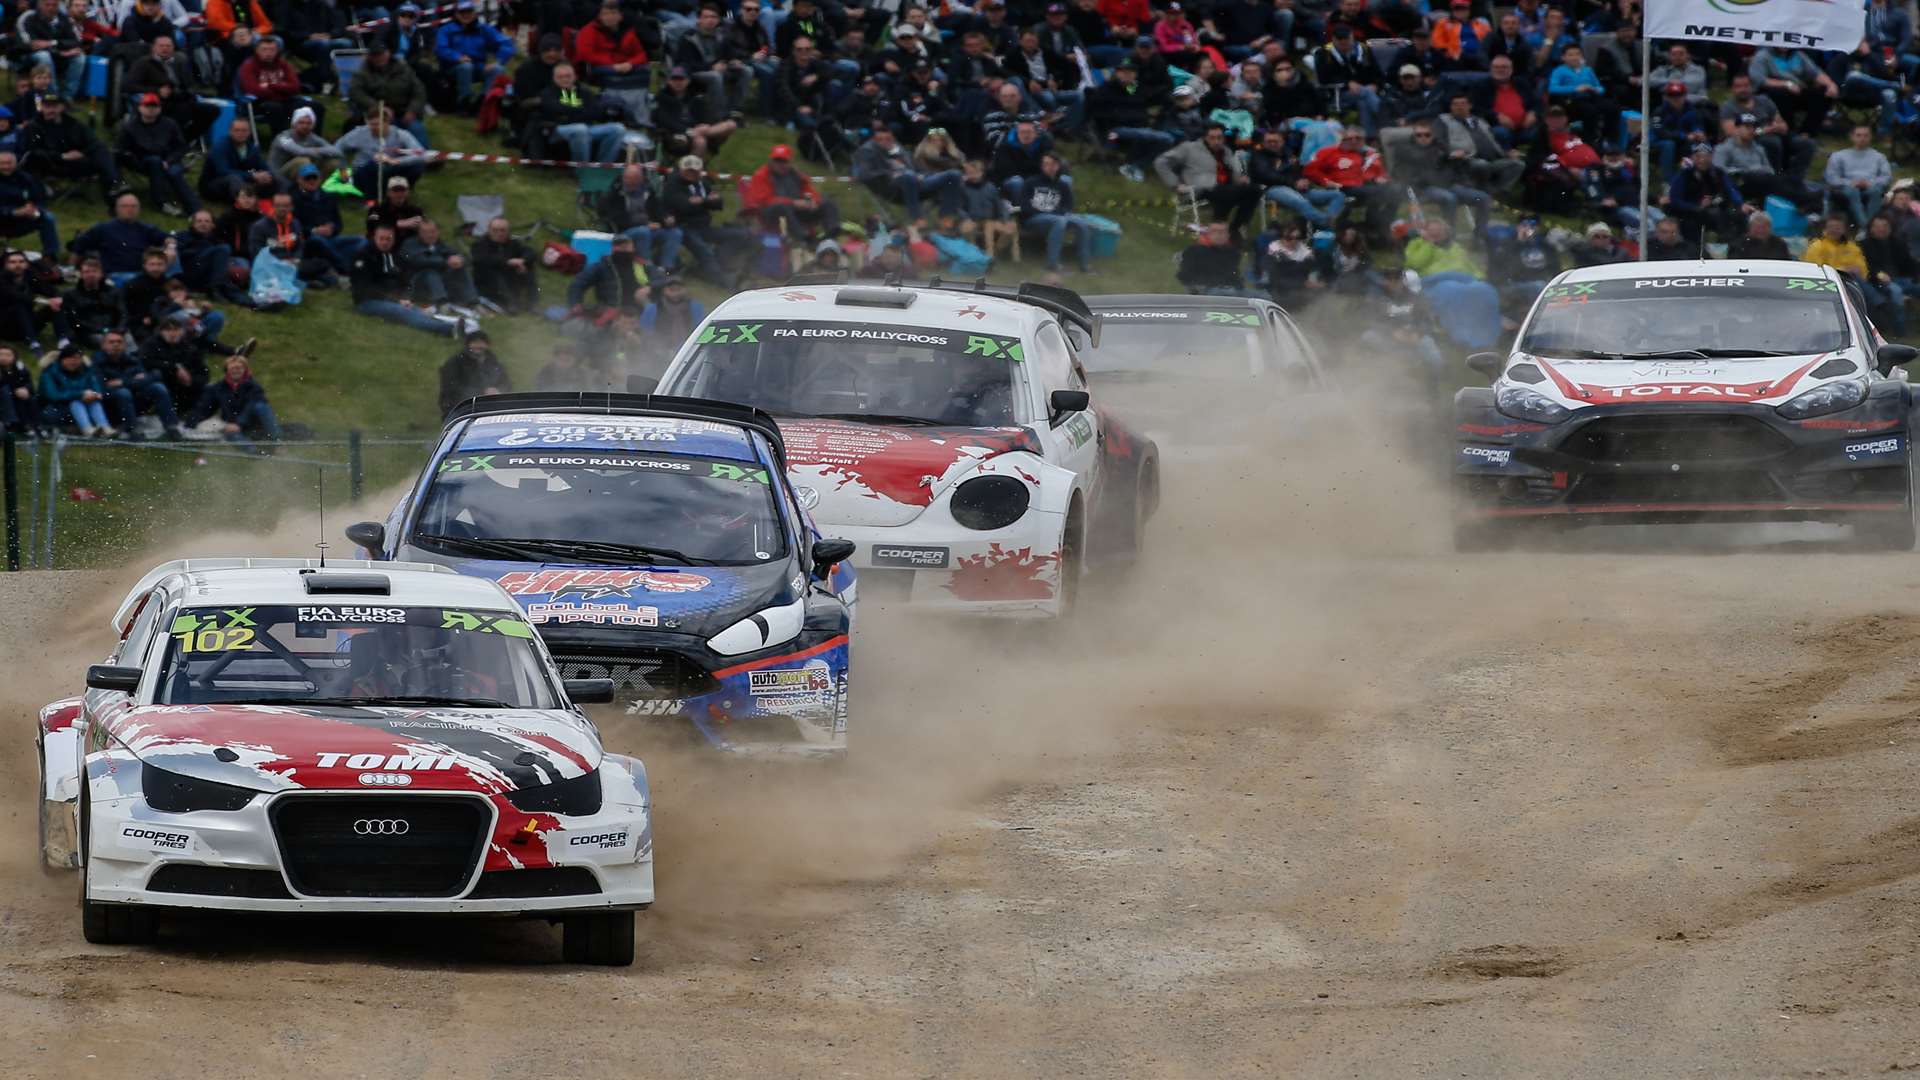 The European Rallycross Championship could return to Lydden. Picture: FIAWorldRallycross.com